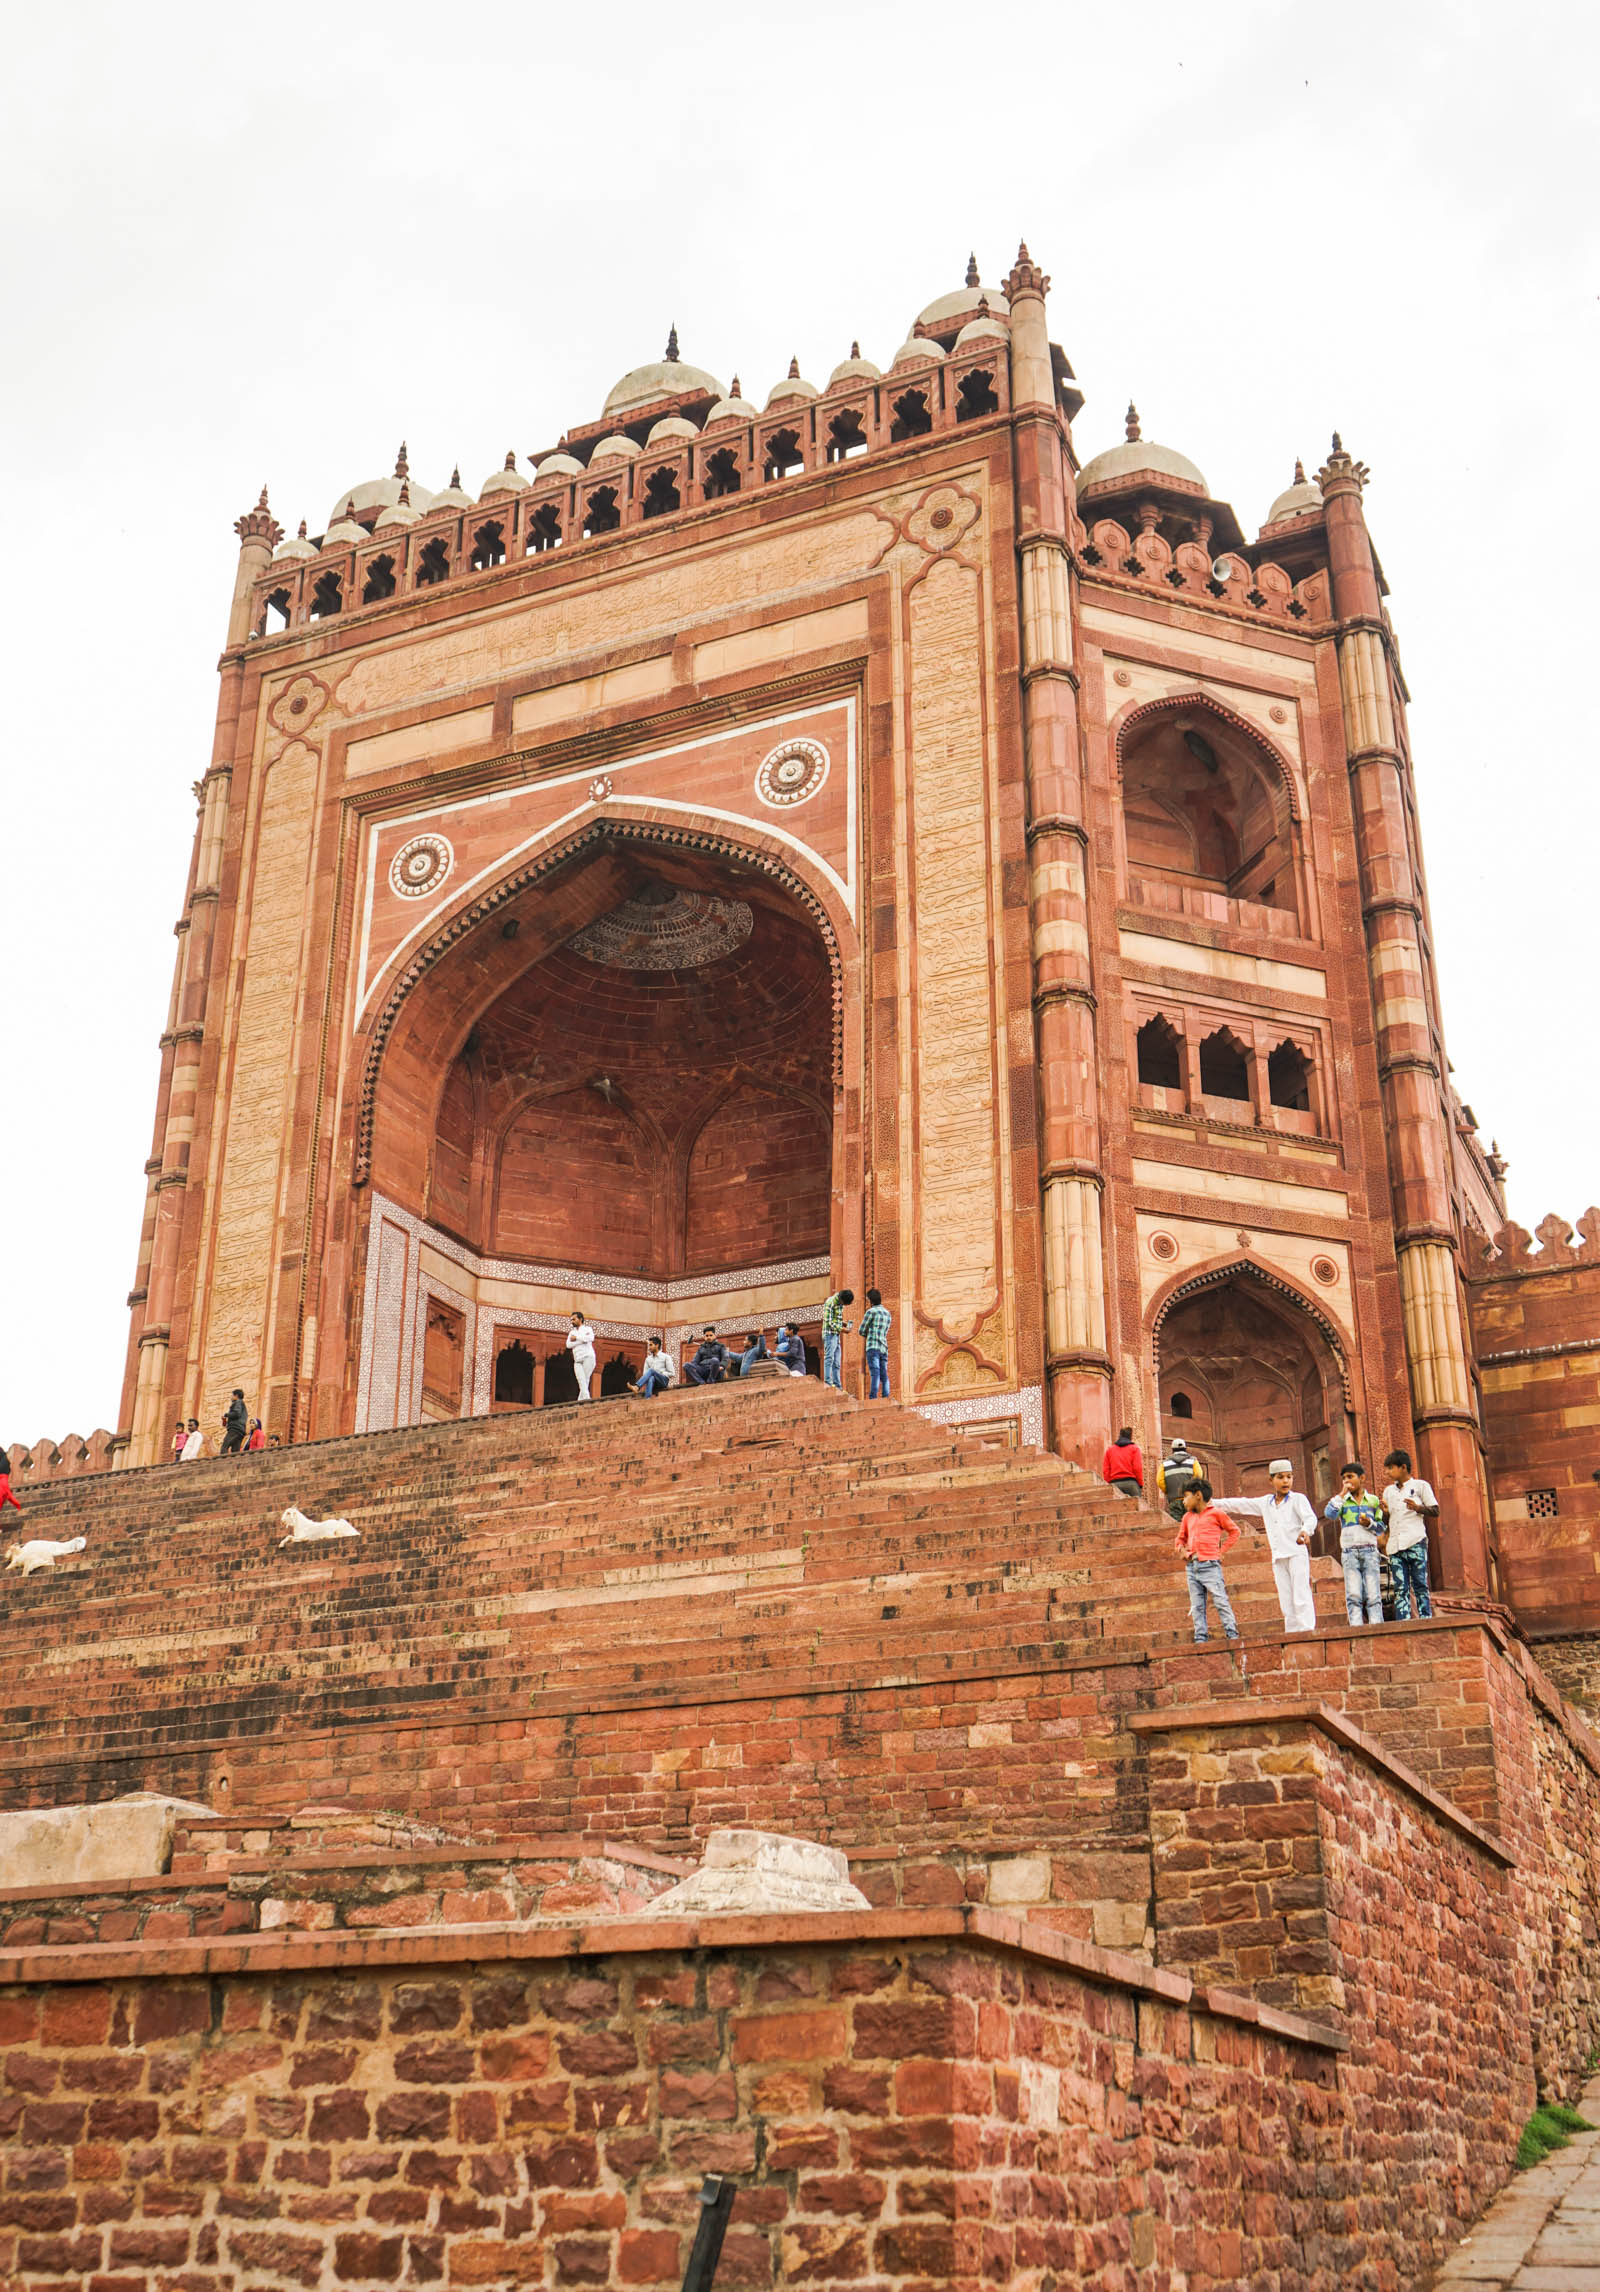 The entrance to the mosque at Fatehpur Sikri